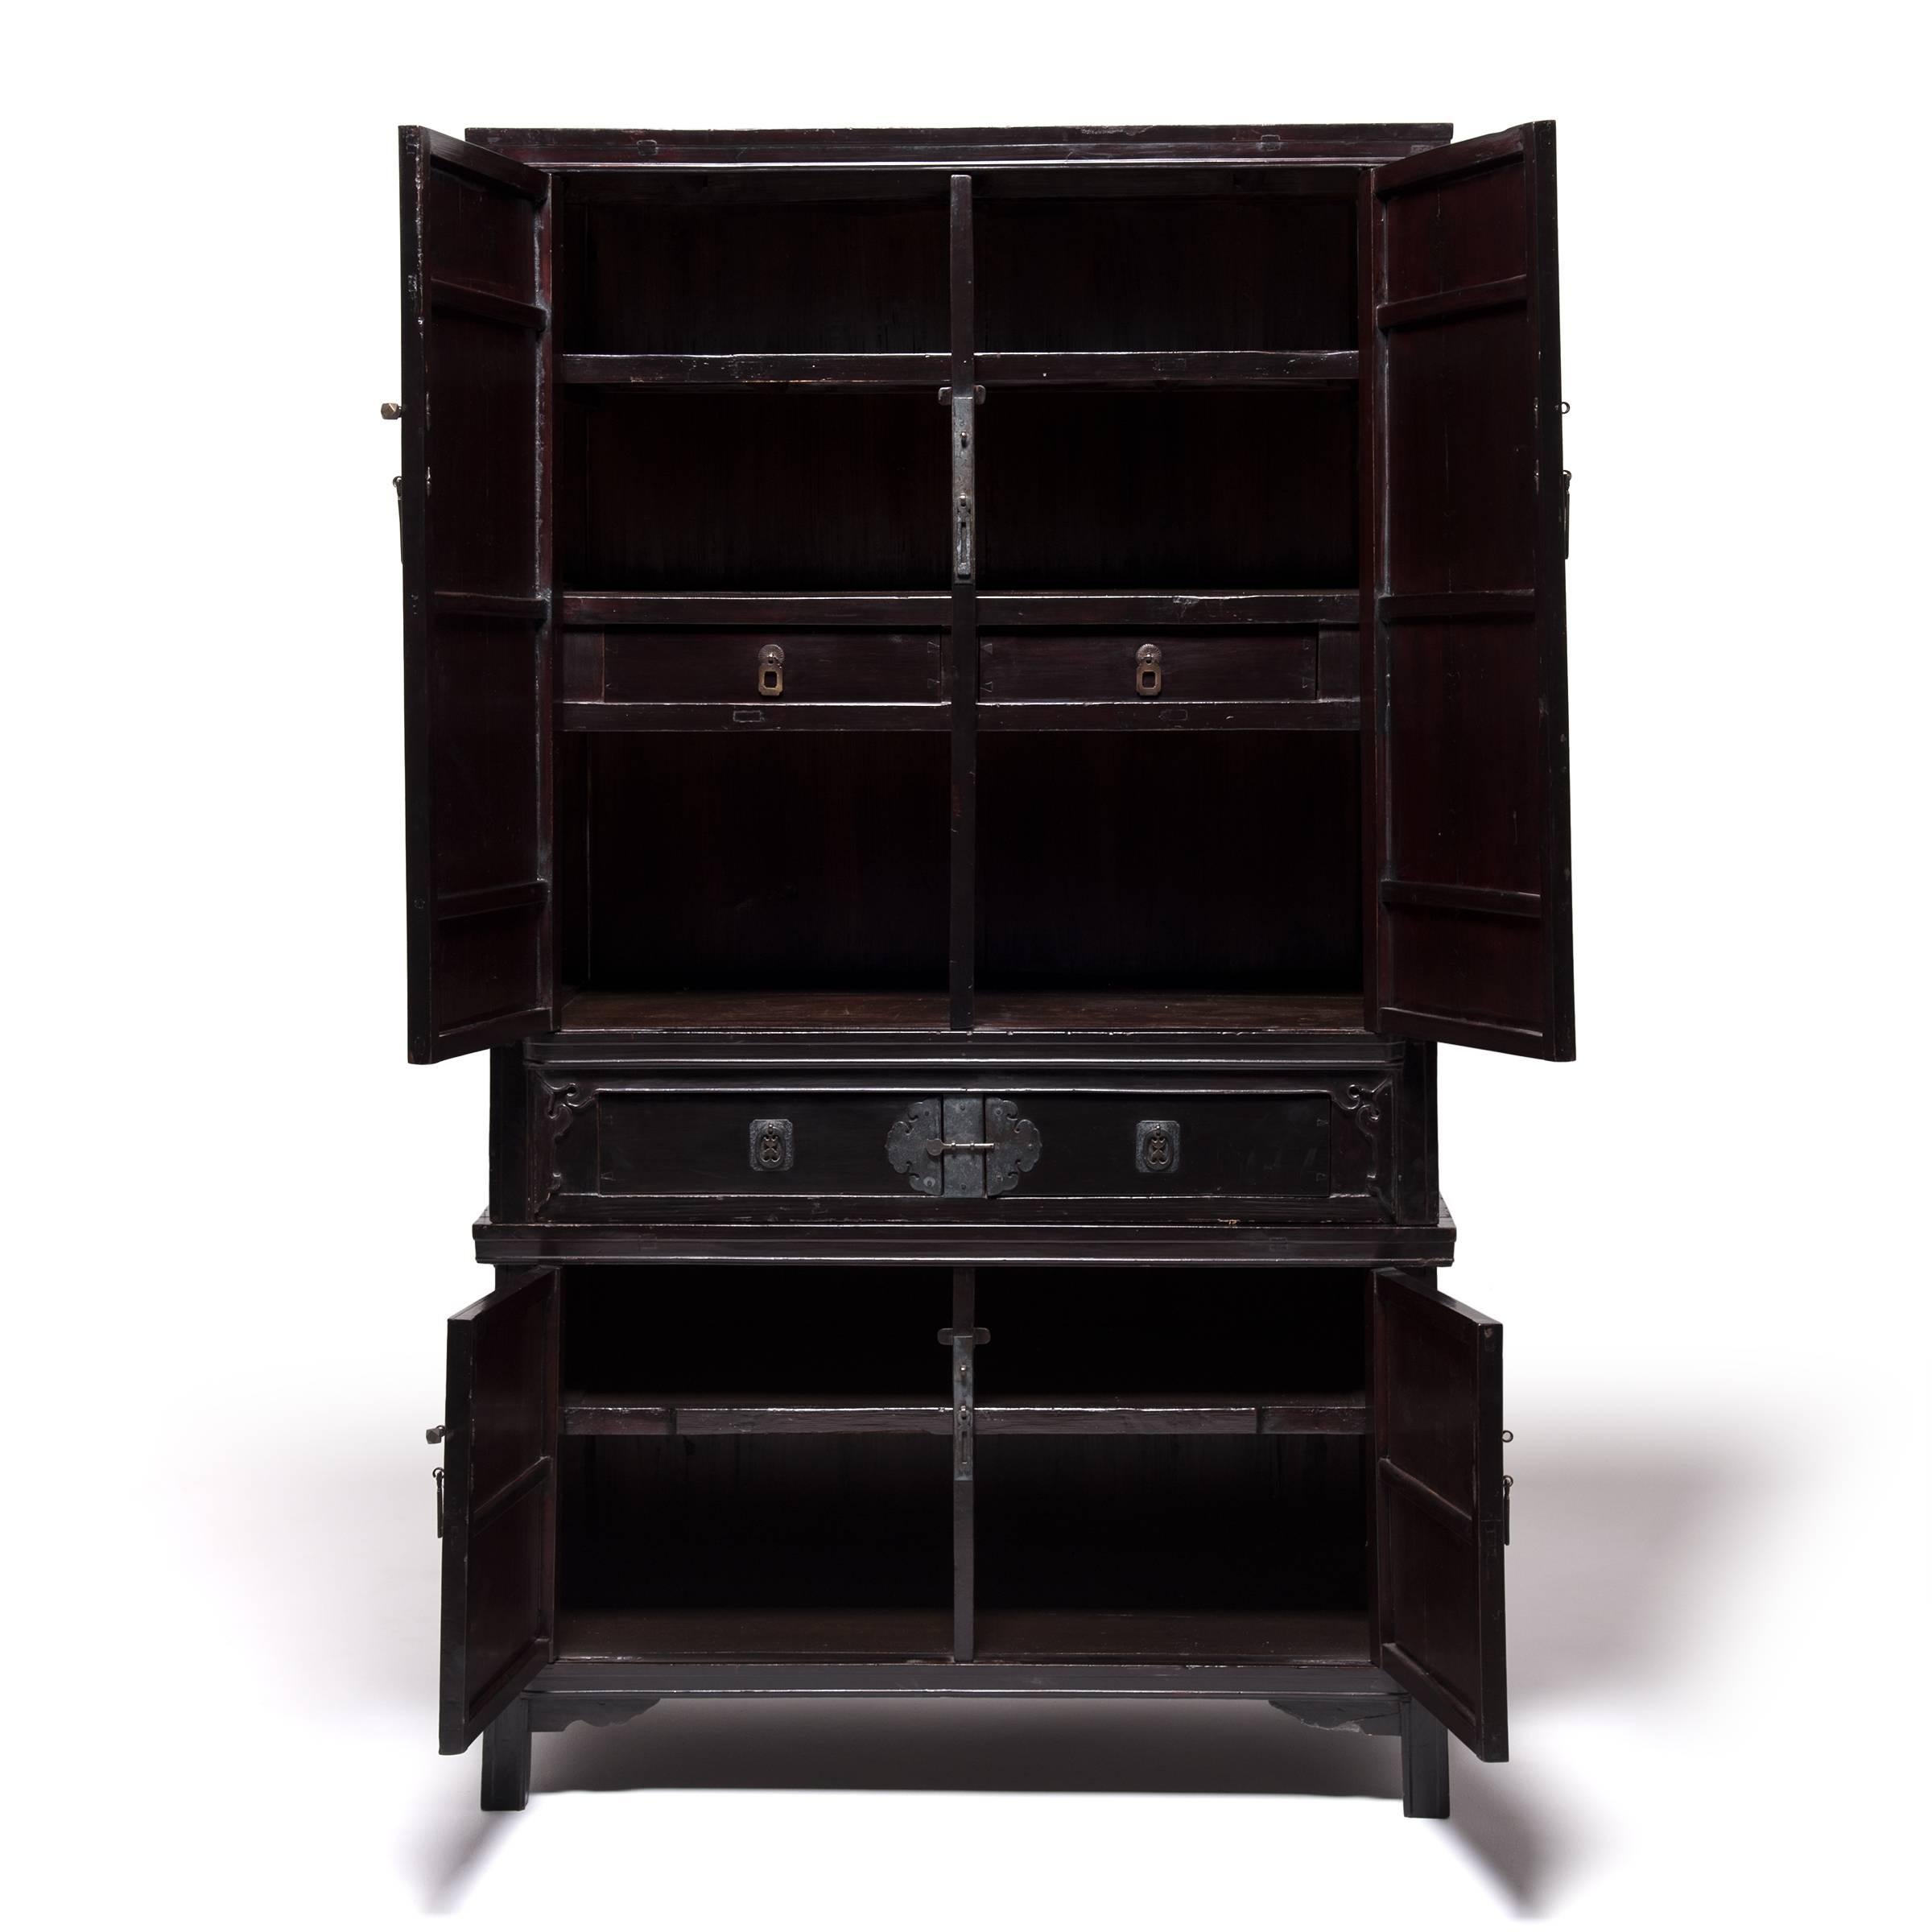 Classic Chinese furniture design is characterized by the flawless construction, purity of line, and dedication to detail you see here in this beautiful two-piece stacking cabinet. The Fujian artisan who carved this cabinet from cedar over 150 years